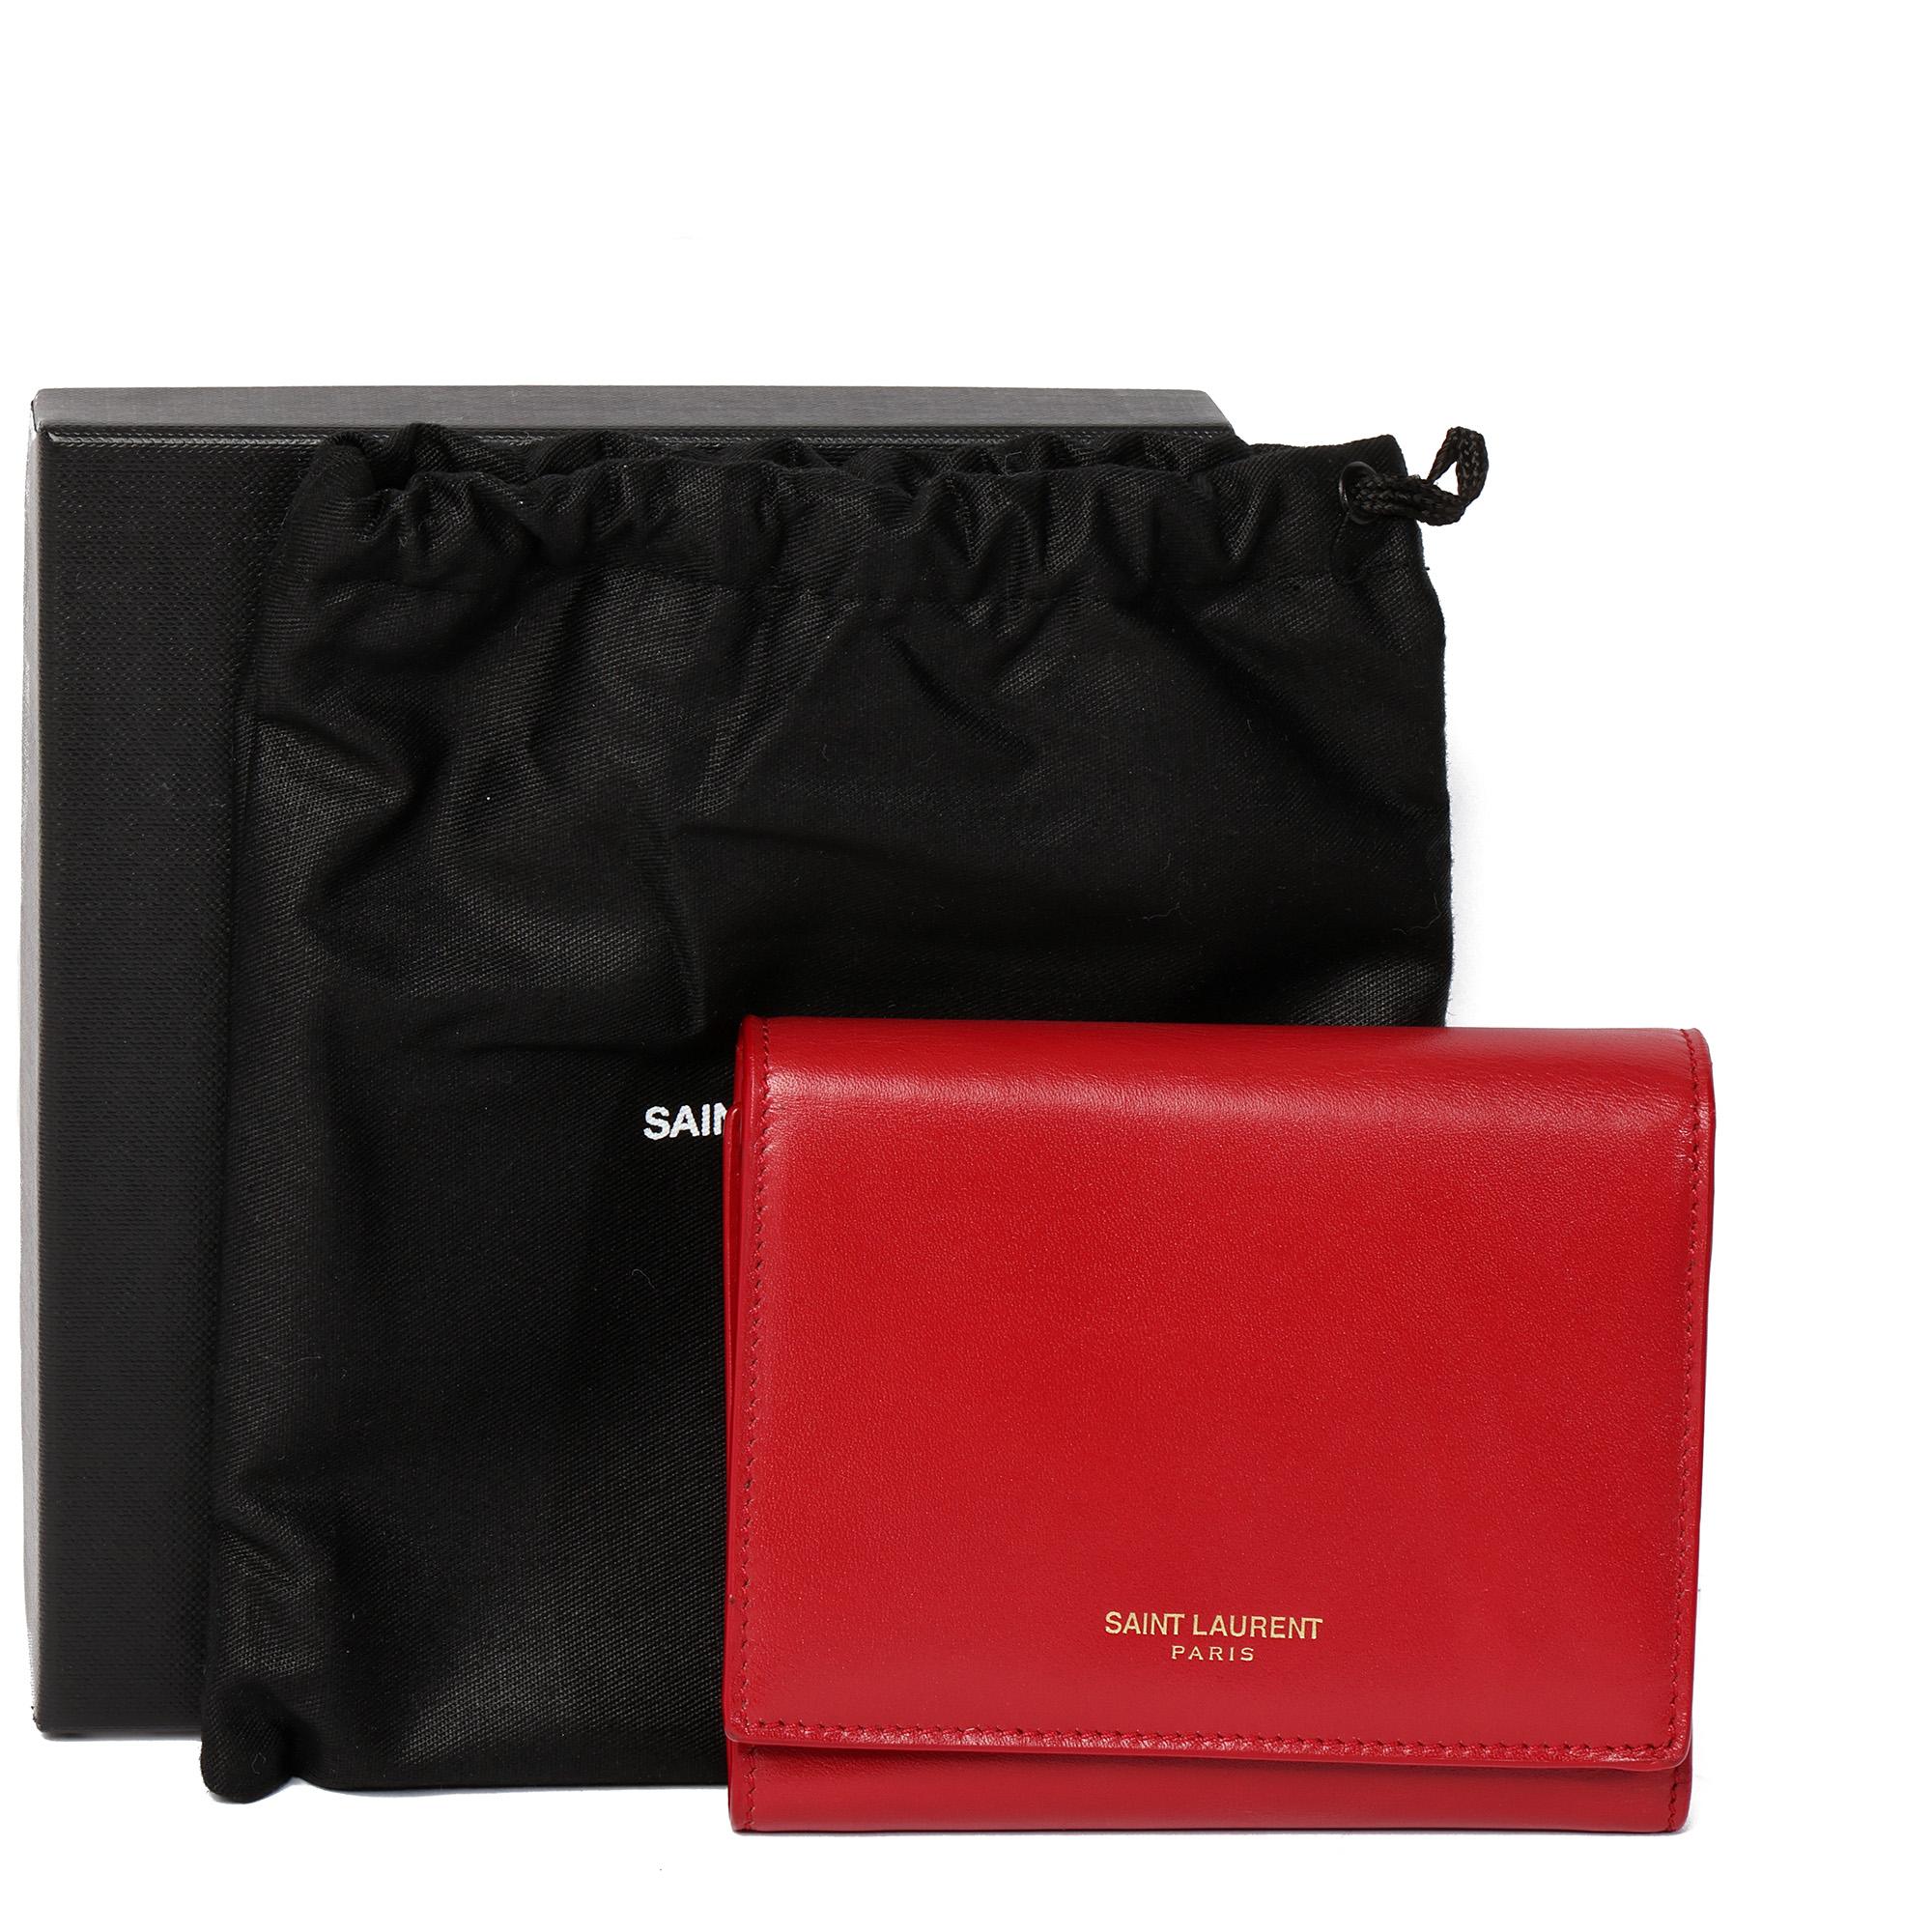 Saint Laurent Rouge Orient Shiny Smooth Leather Bi-fold Compact Wallet In Excellent Condition For Sale In Bishop's Stortford, Hertfordshire